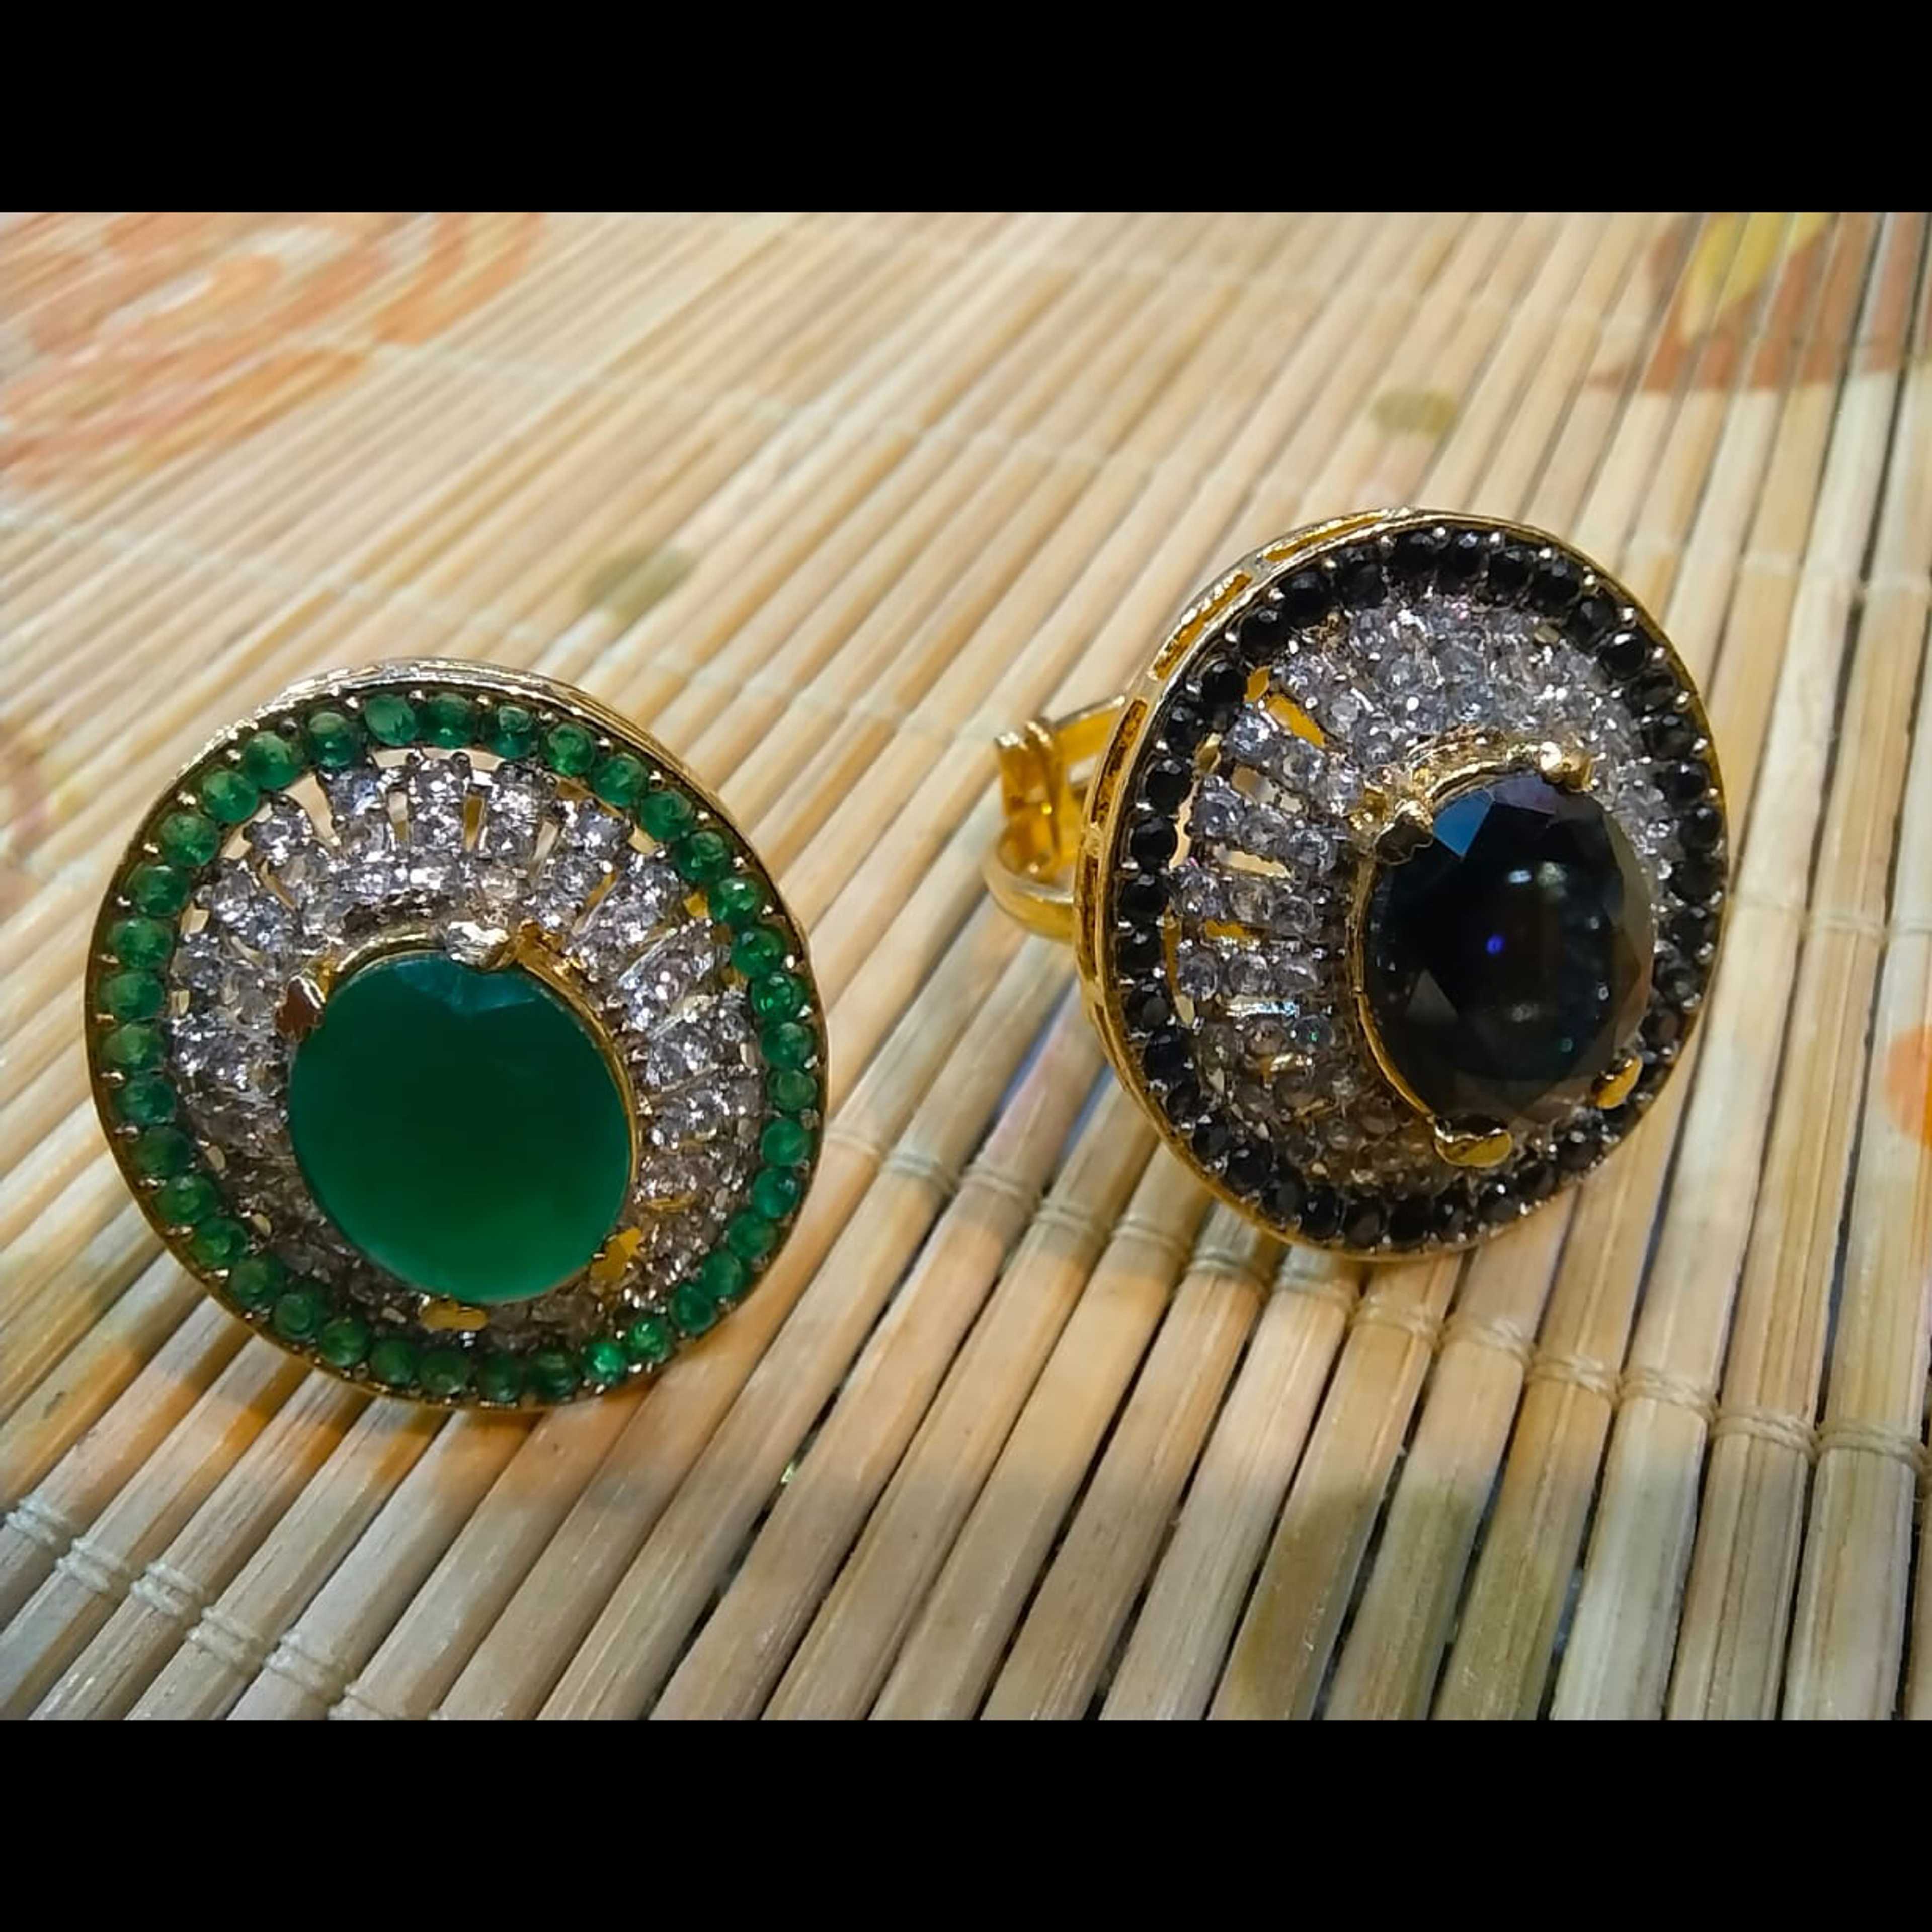 Green Emerald and Black Color Stones with Zircon Stones Rings